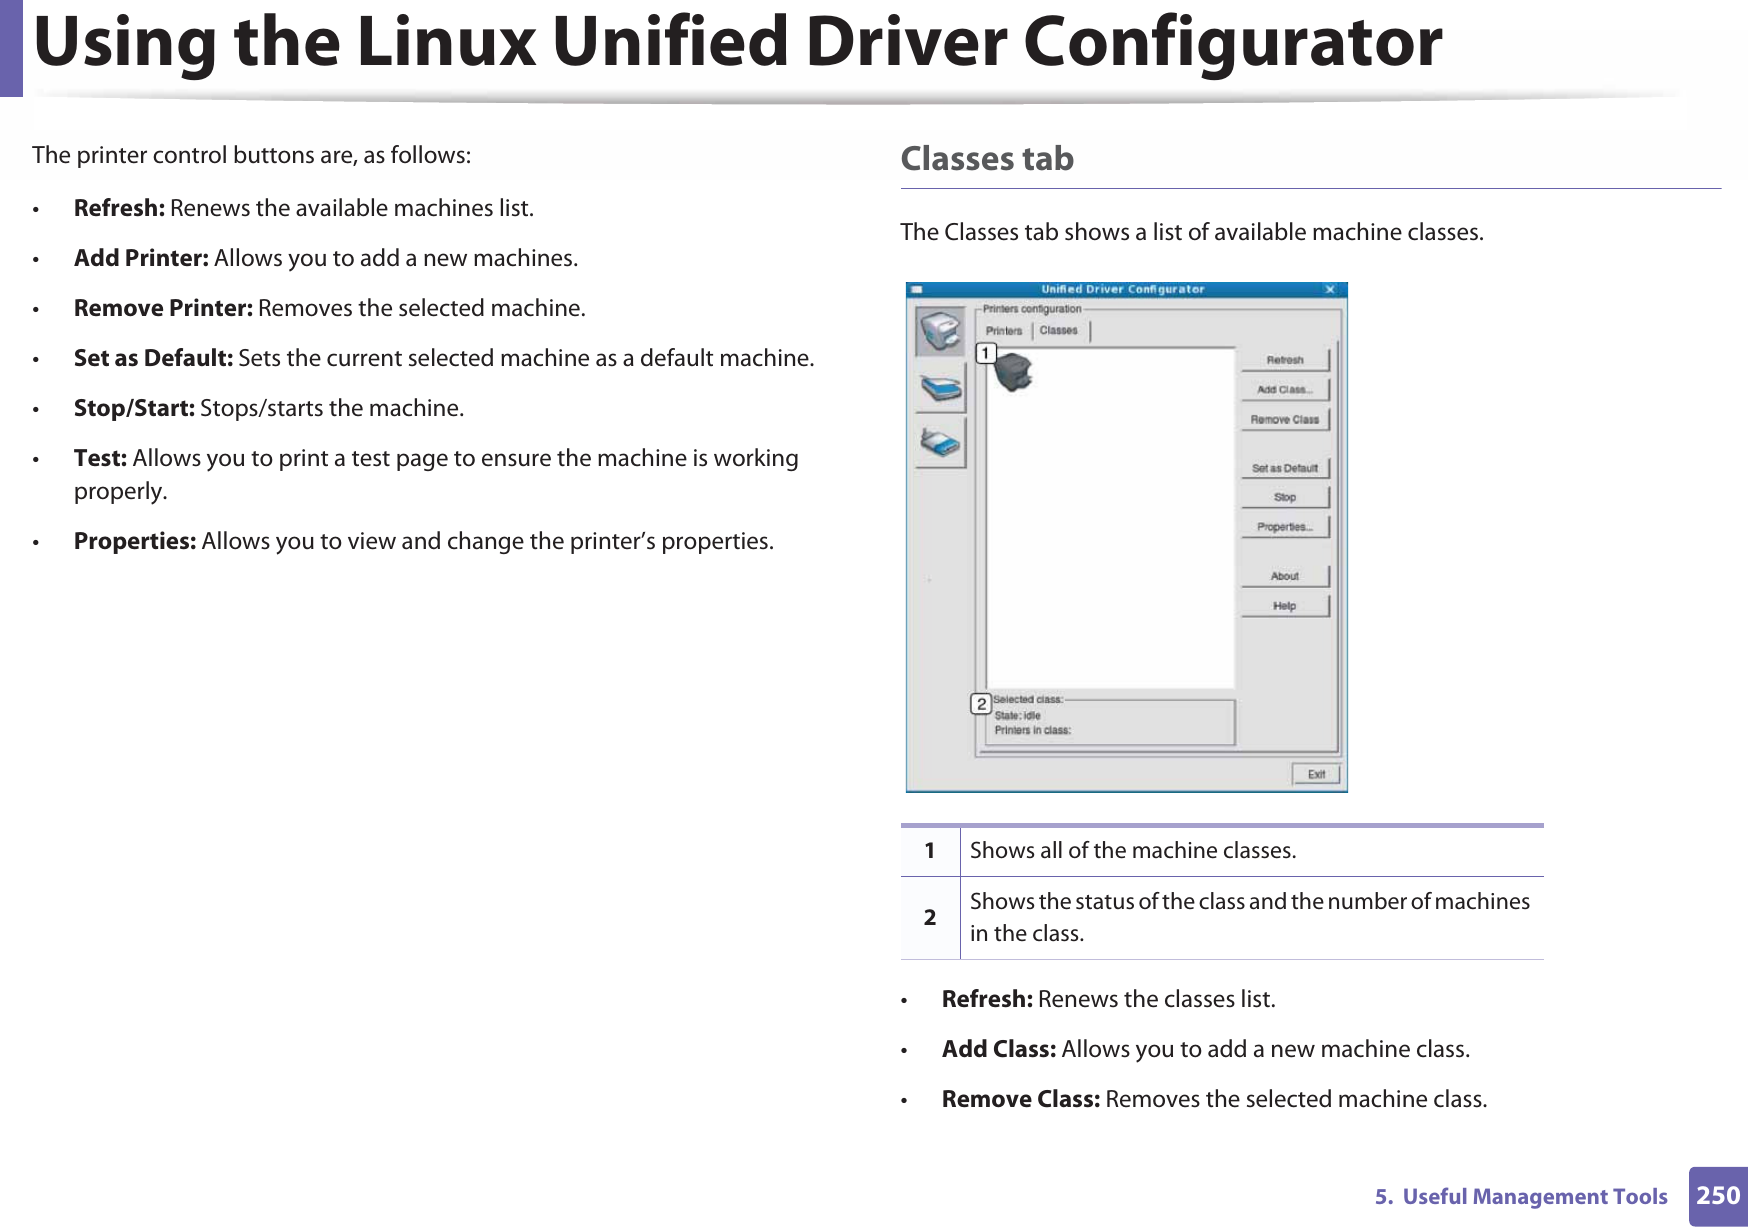 Using the Linux Unified Driver Configurator2505.  Useful Management ToolsThe printer control buttons are, as follows:•Refresh: Renews the available machines list.•Add Printer: Allows you to add a new machines.•Remove Printer: Removes the selected machine.•Set as Default: Sets the current selected machine as a default machine.•Stop/Start: Stops/starts the machine.•Test: Allows you to print a test page to ensure the machine is working properly.•Properties: Allows you to view and change the printer’s properties. Classes tabThe Classes tab shows a list of available machine classes.•Refresh: Renews the classes list.•Add Class: Allows you to add a new machine class.•Remove Class: Removes the selected machine class.1Shows all of the machine classes.2Shows the status of the class and the number of machines in the class.